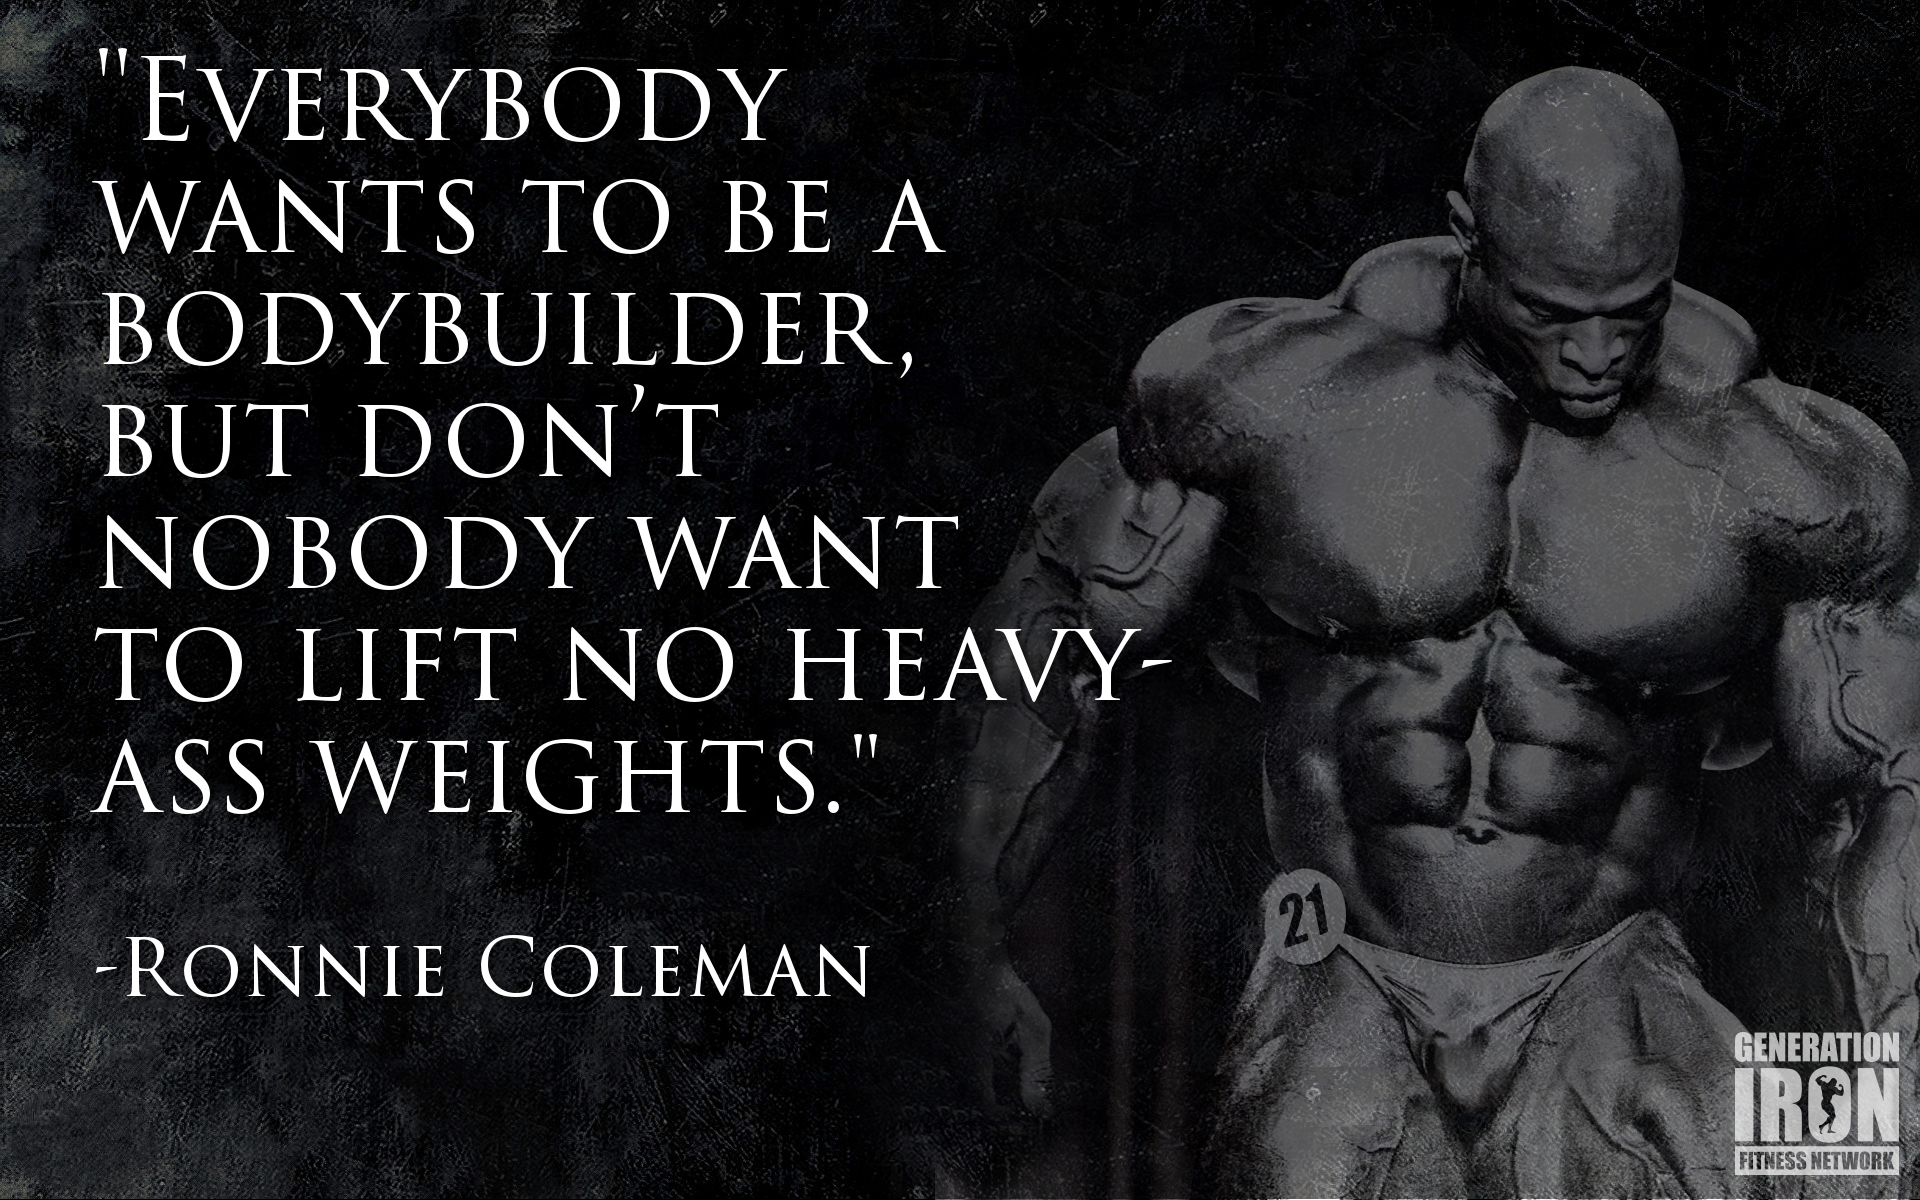 Generation Iron Quote Ronnie Coleman